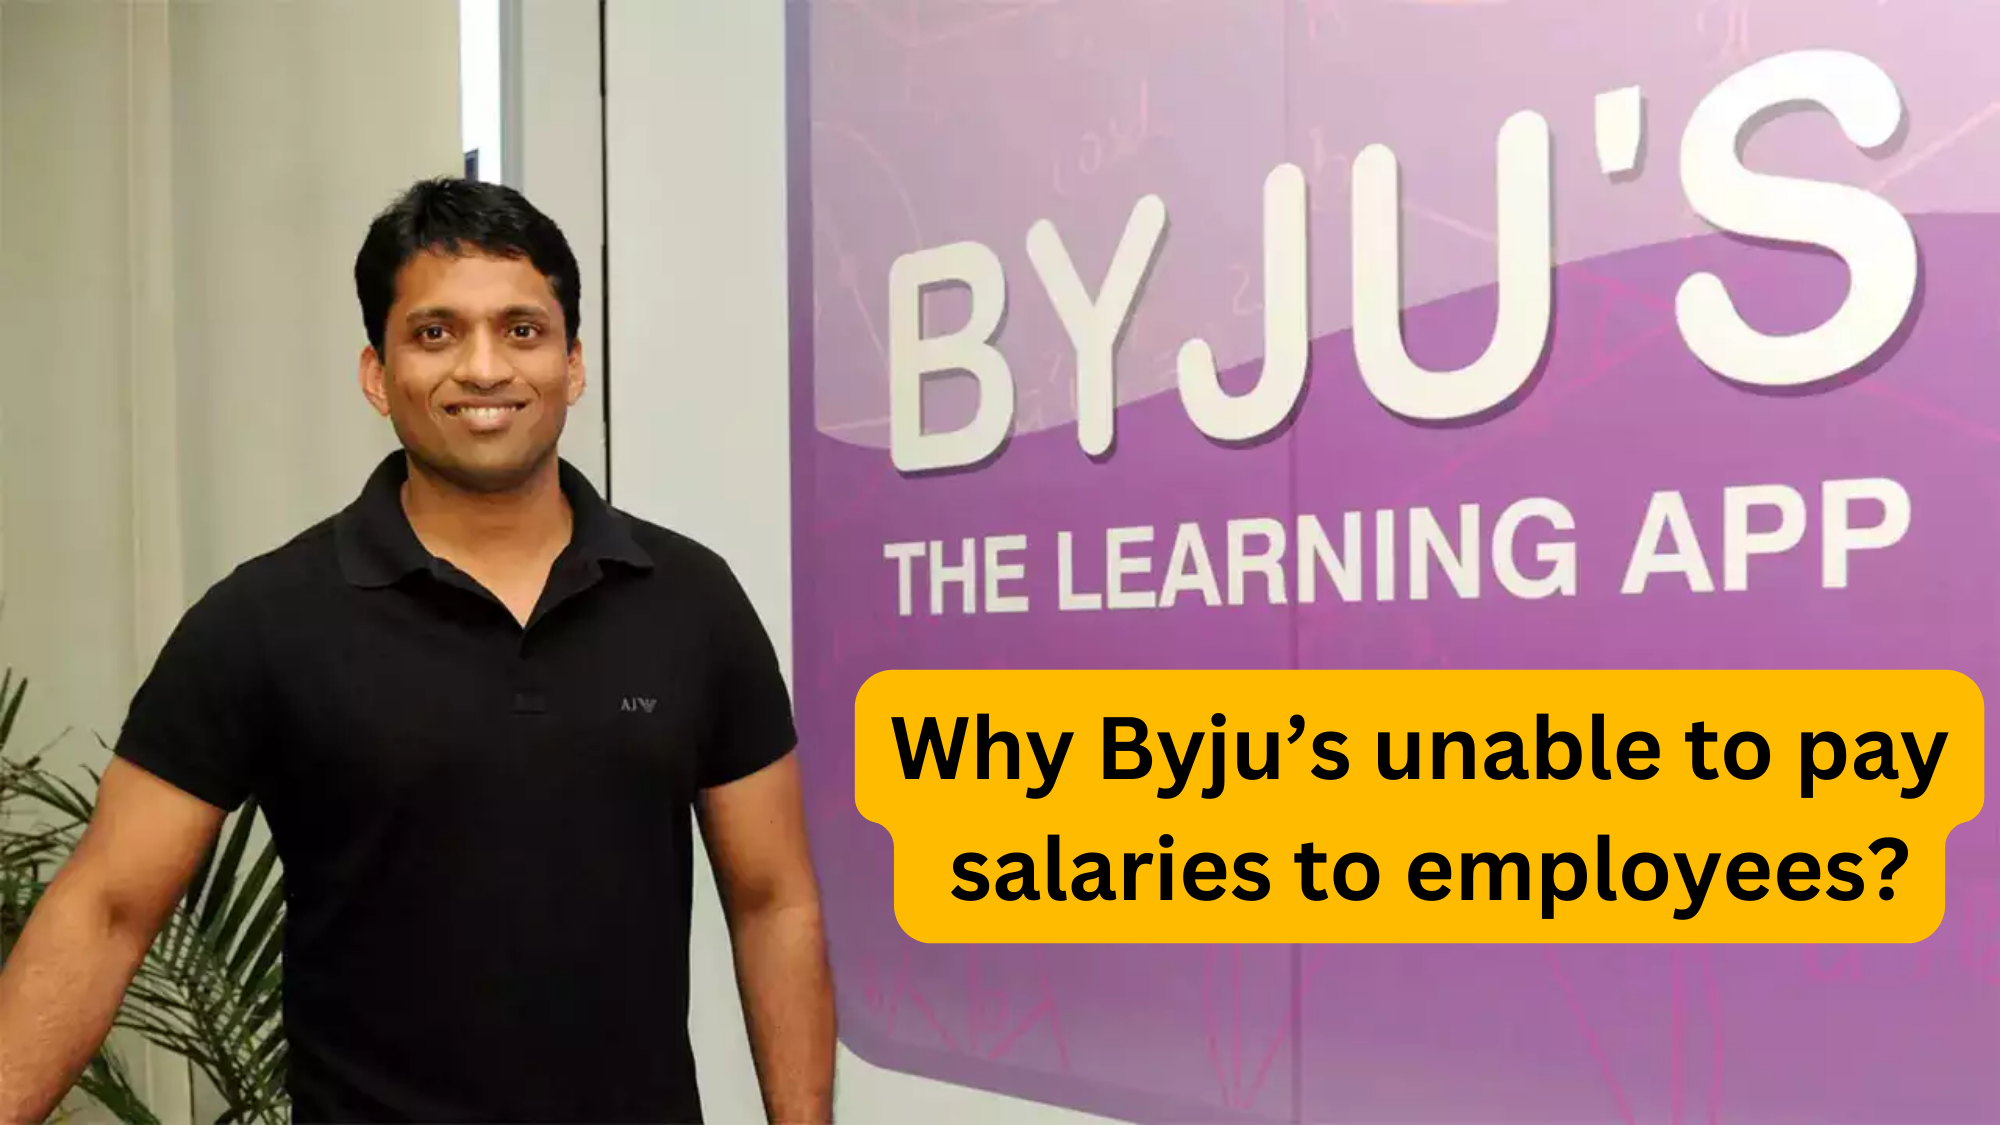 Why Byju’s unable to pay salaries to employees?